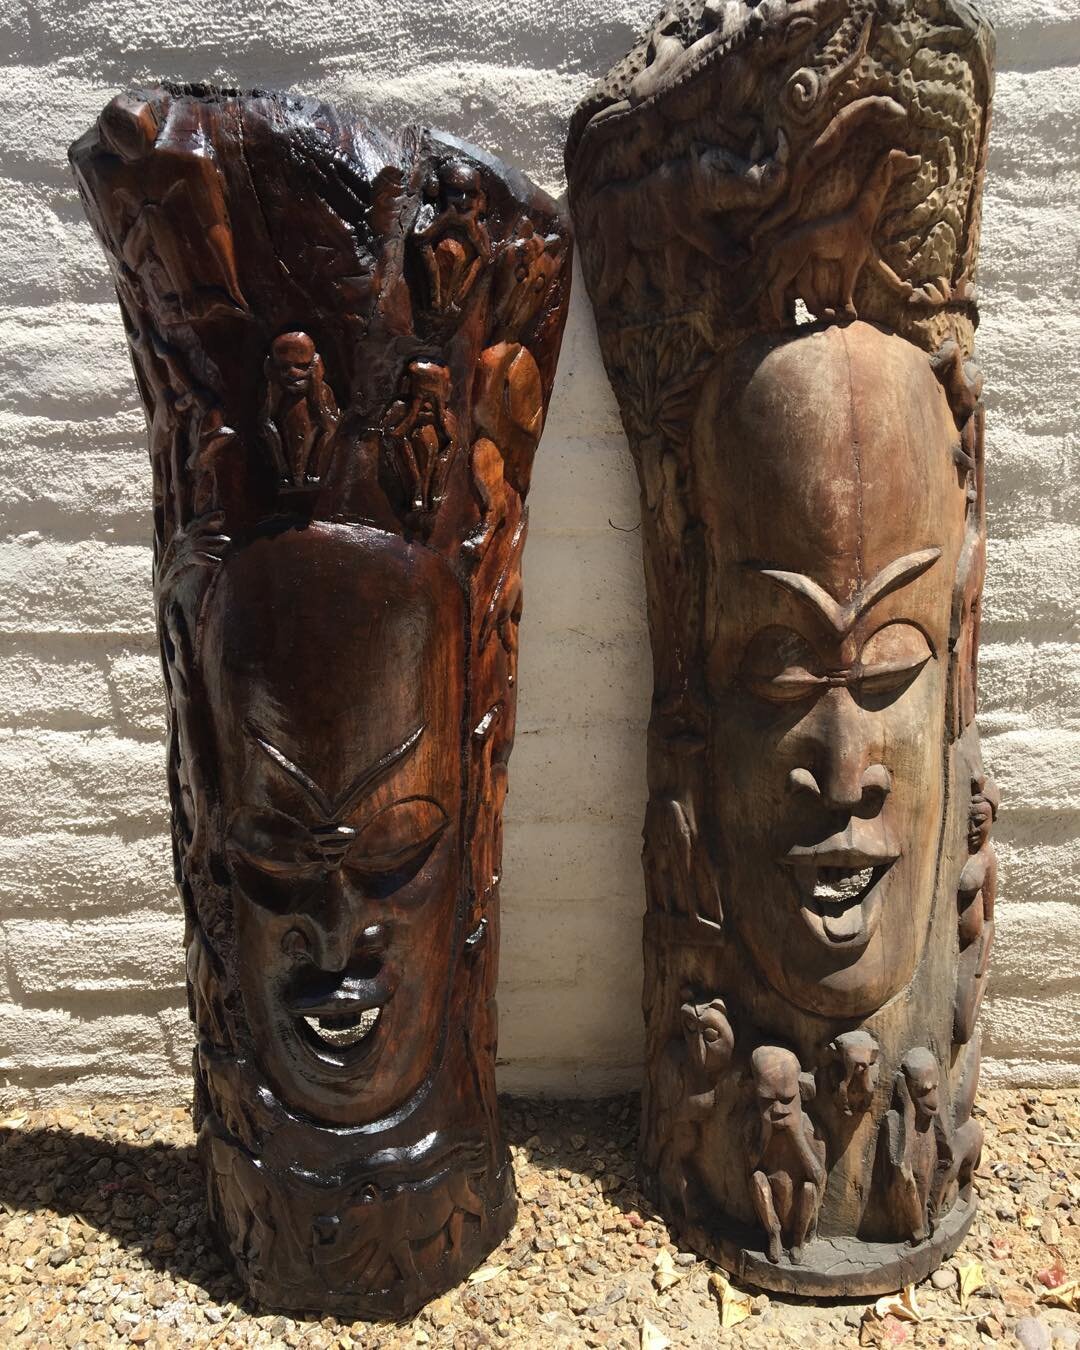 Acquired these carvings over 10 yrs. ago from some Senegalese friends. Every year since I give them a coating of shea butter to bring back their natural wood color and quench their thirst from the heat. Before and after. The one on the right will be 